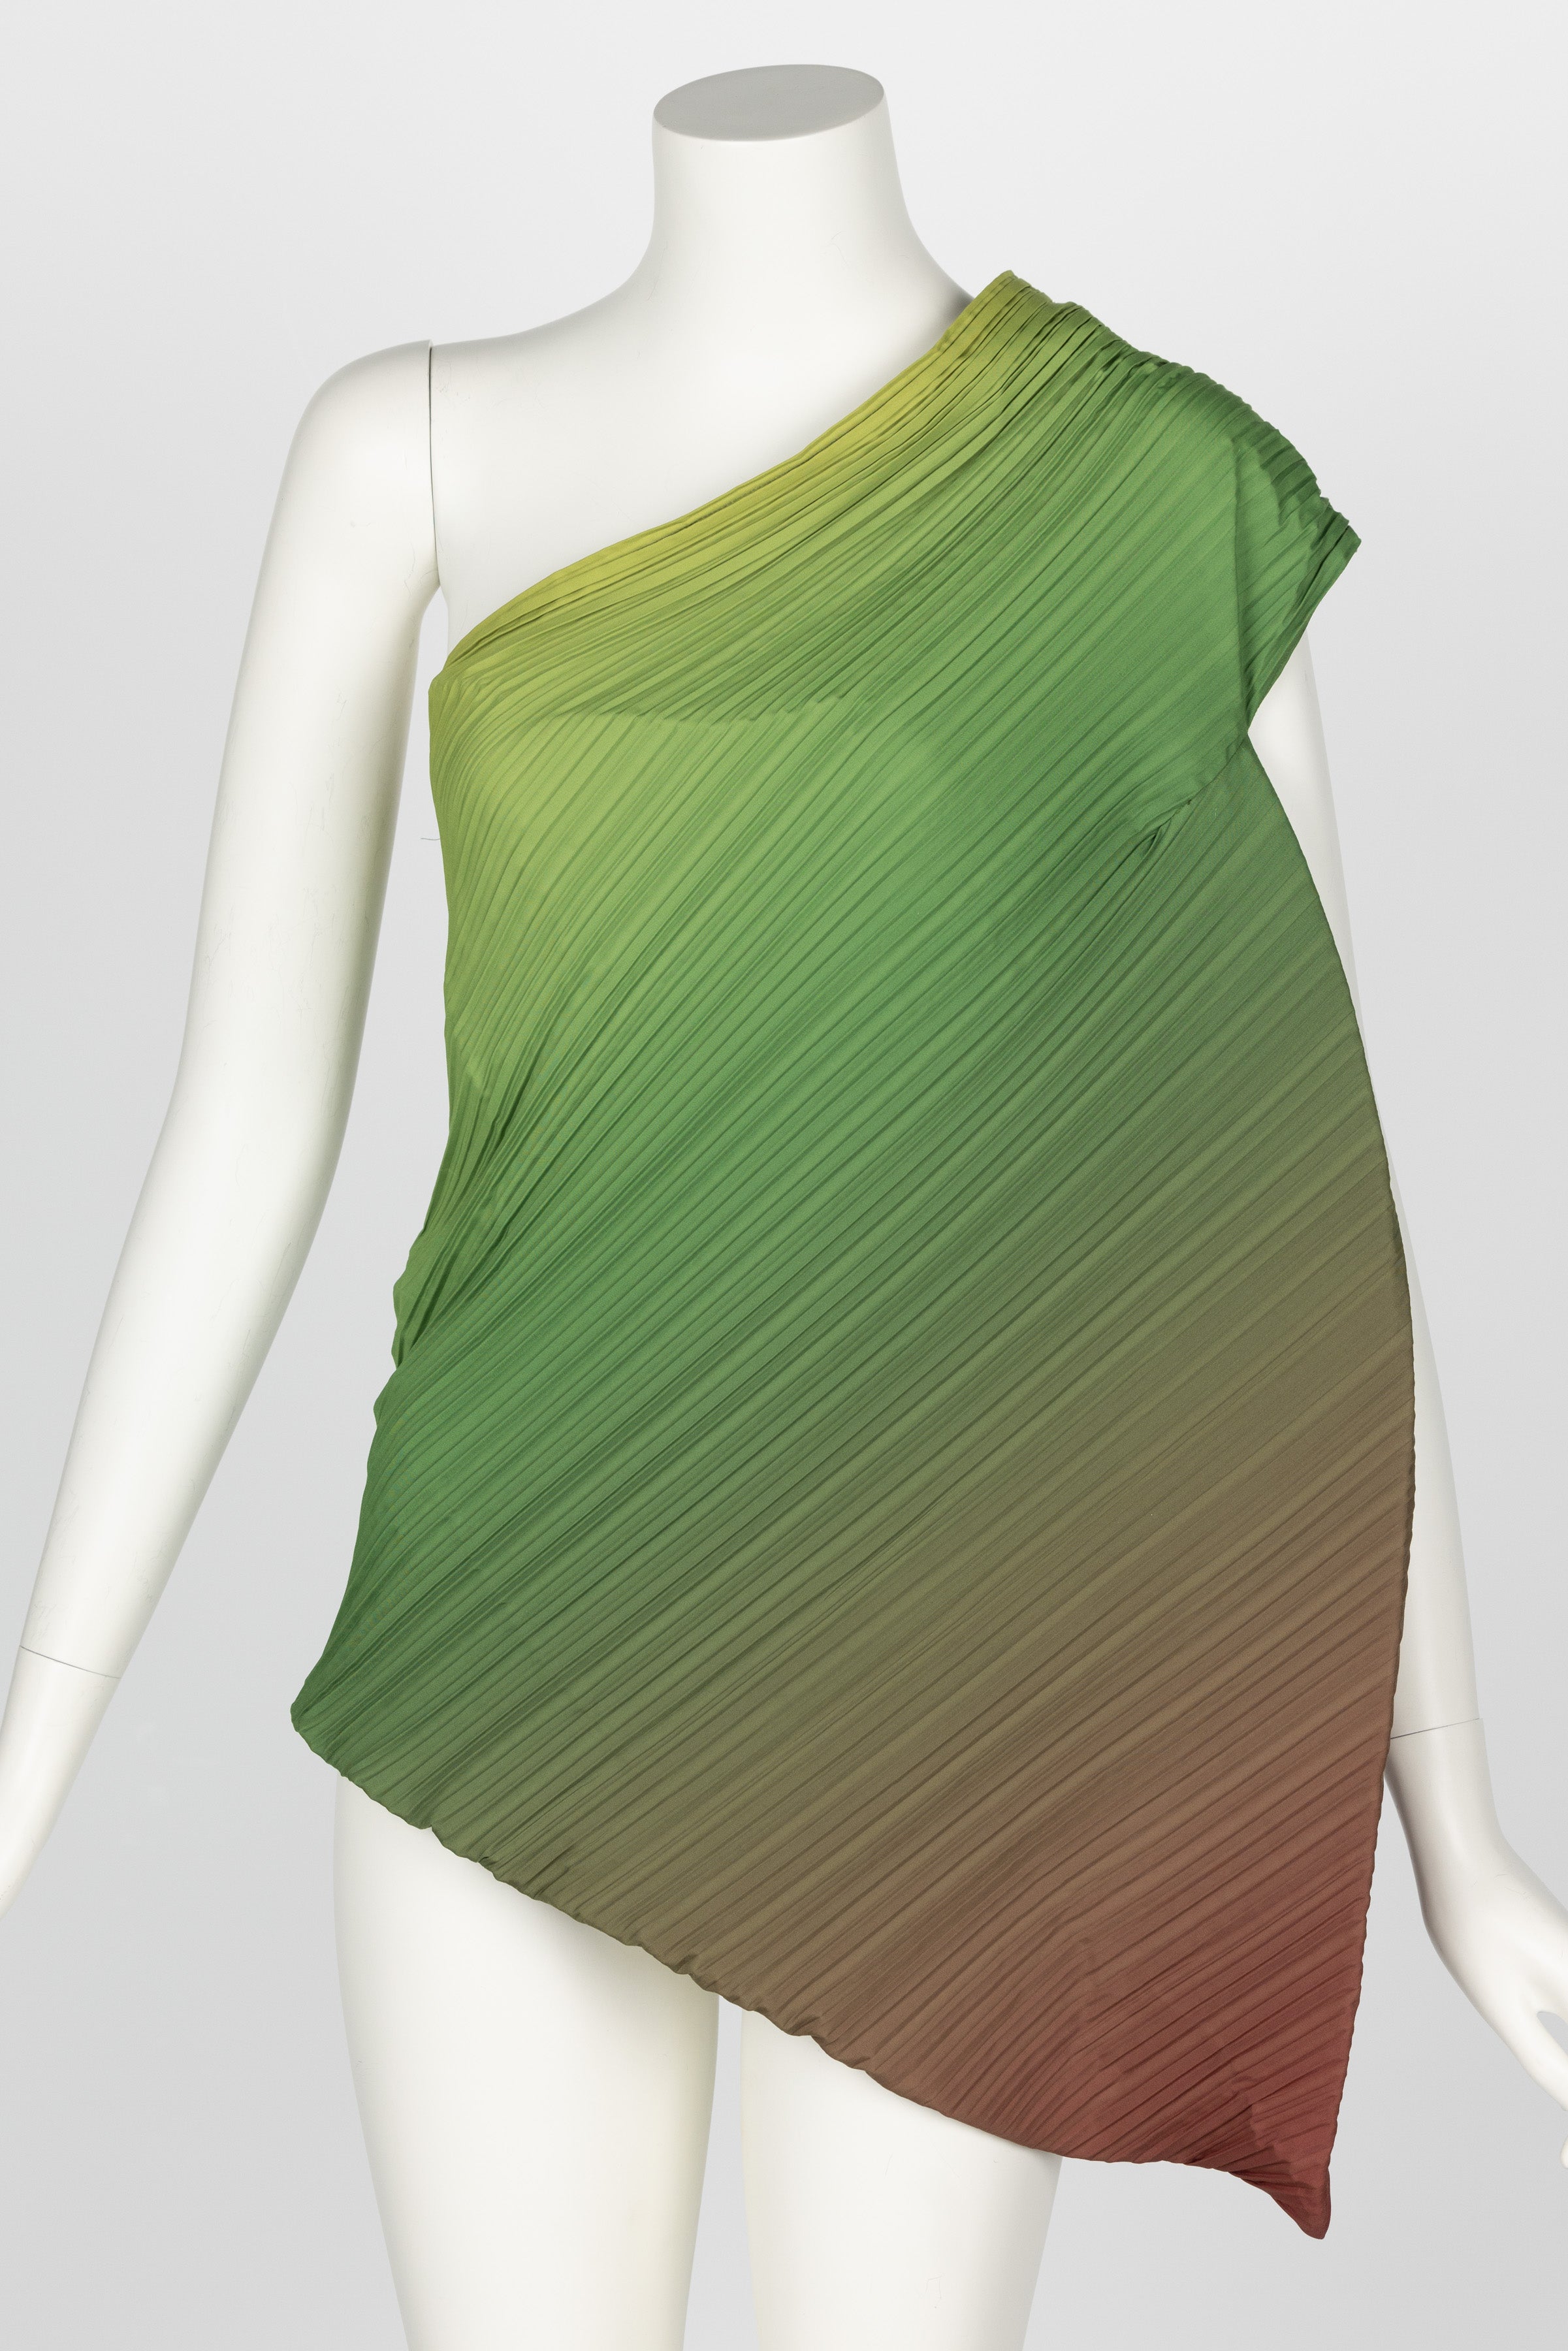 Early Issey Miyake 1989 Collection Ombre One Shoulder Top In Excellent Condition In Boca Raton, FL